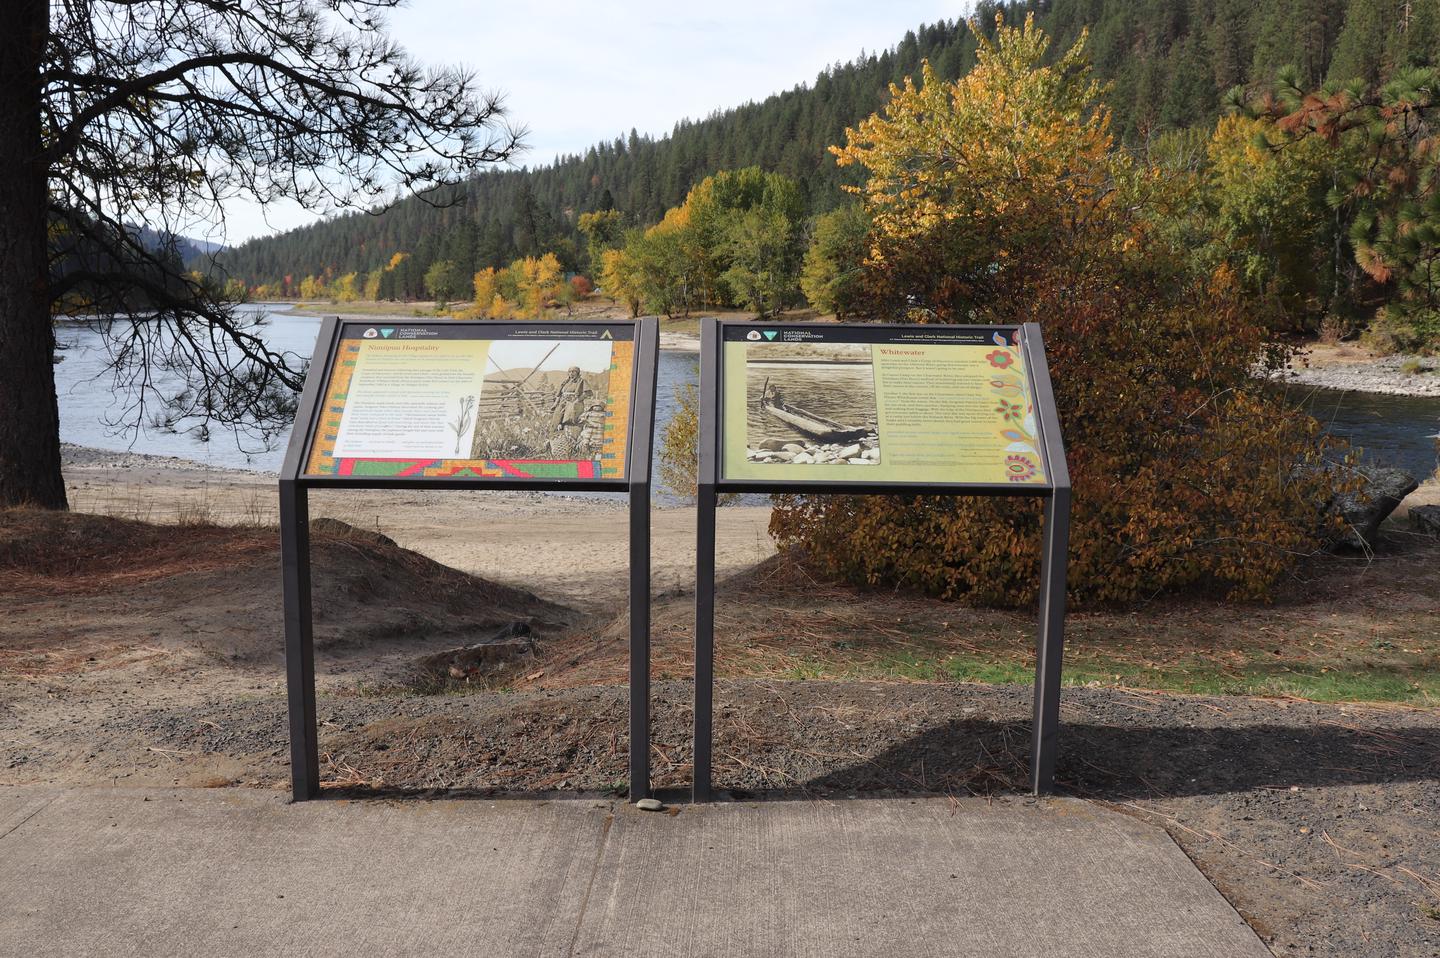 The interpretive panels at Pink House Recreation Site.Two interpretive panels at Pink House Recreation Site address the Lewis and Clark National Historic Trail expedition.